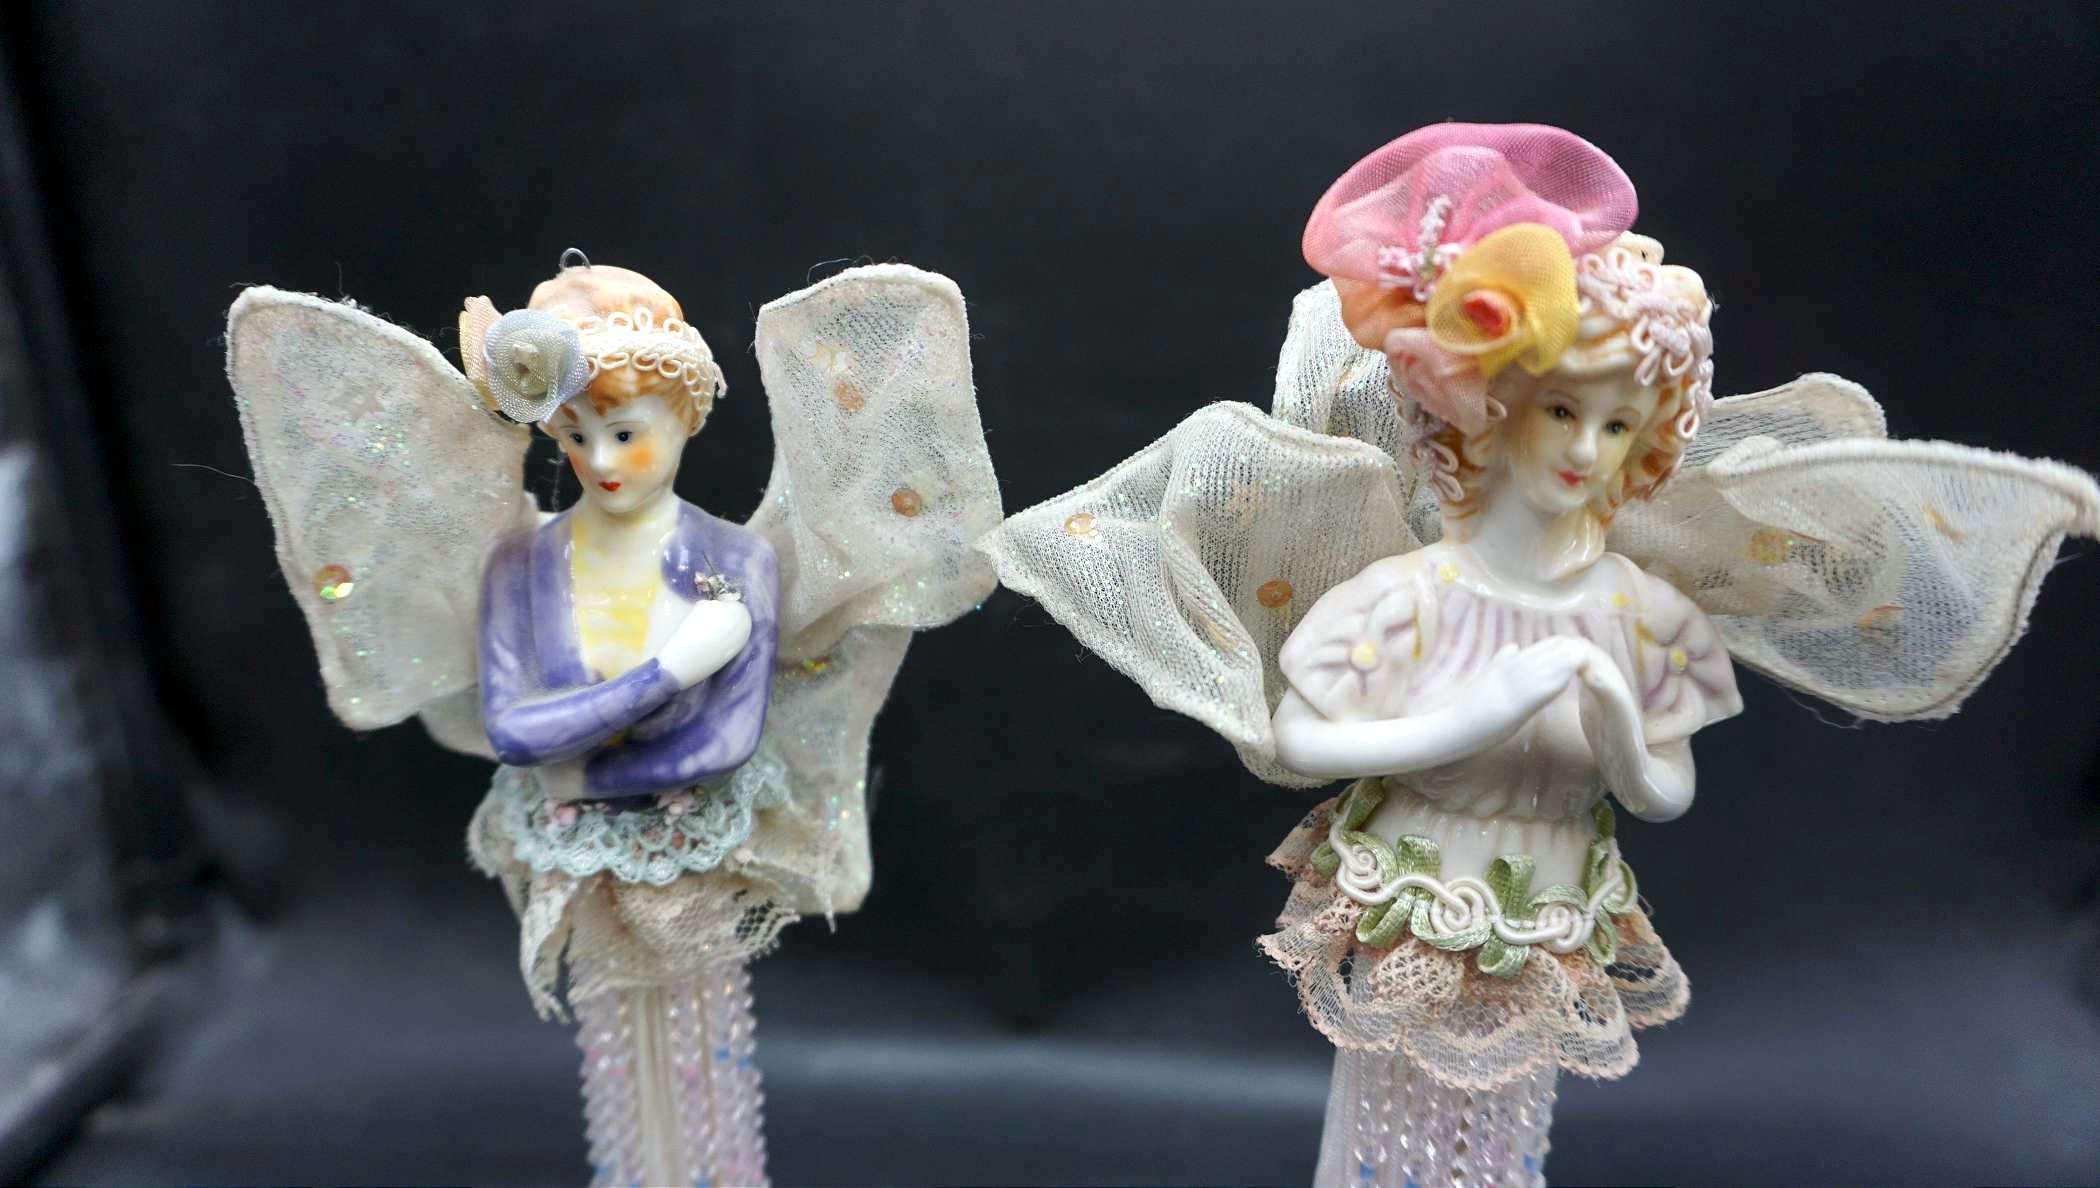 2 - Tall Standing Figurines